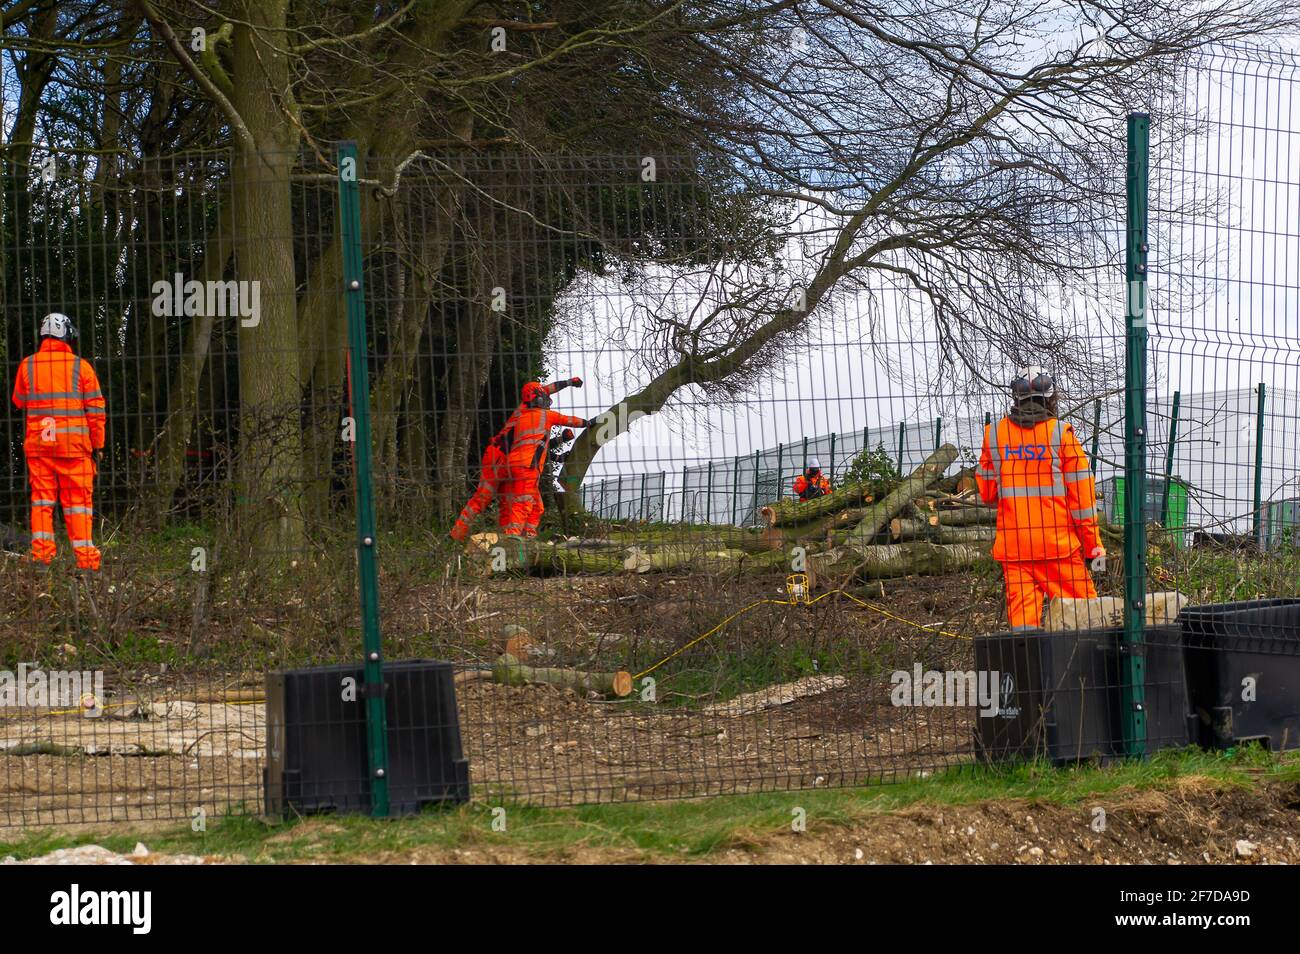 Aylesbury Vale, UK. 6th April, 2021. An HS2 tree feller punches the air and cheers as a tree crashes to the ground. HS2 have started felling the much loved Jones Hill Wood today and were putting tree limbs and all their inhabitants straight through wood chippers today.  Local children's author Roald Dahl is said to have got his inspiration for the children's novel, The Fantastic Mr Fox by walking in this ancient woodland. Environmentalists are furious that Natural England have granted the licence to HS2 to fell the woodland despite there being rare barbastelle bats living in the woods. The con Stock Photo